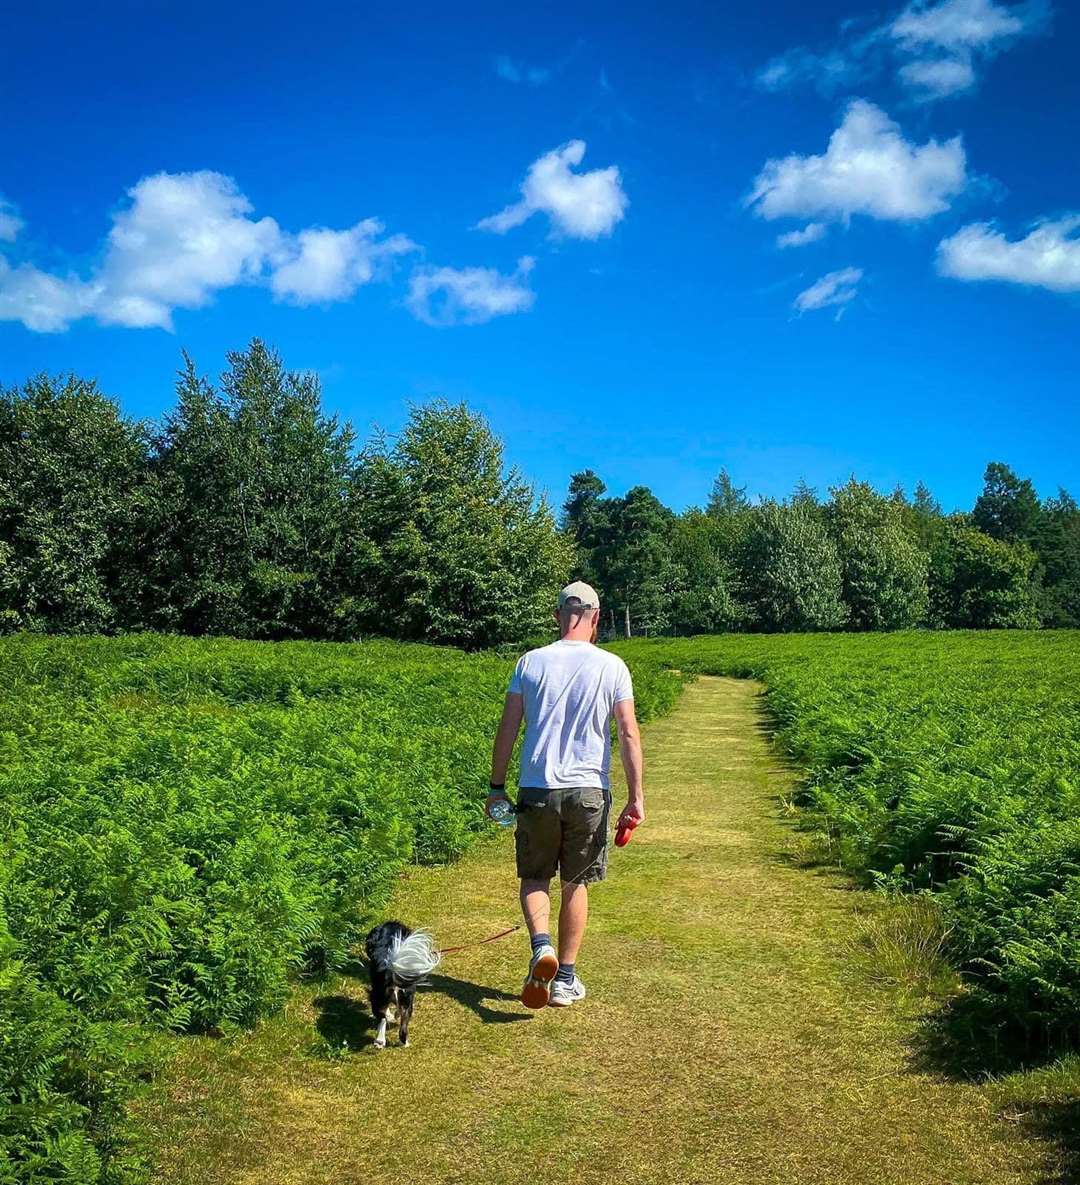 Oliver Bowers started walking more when he got his puppy Ted in 2019